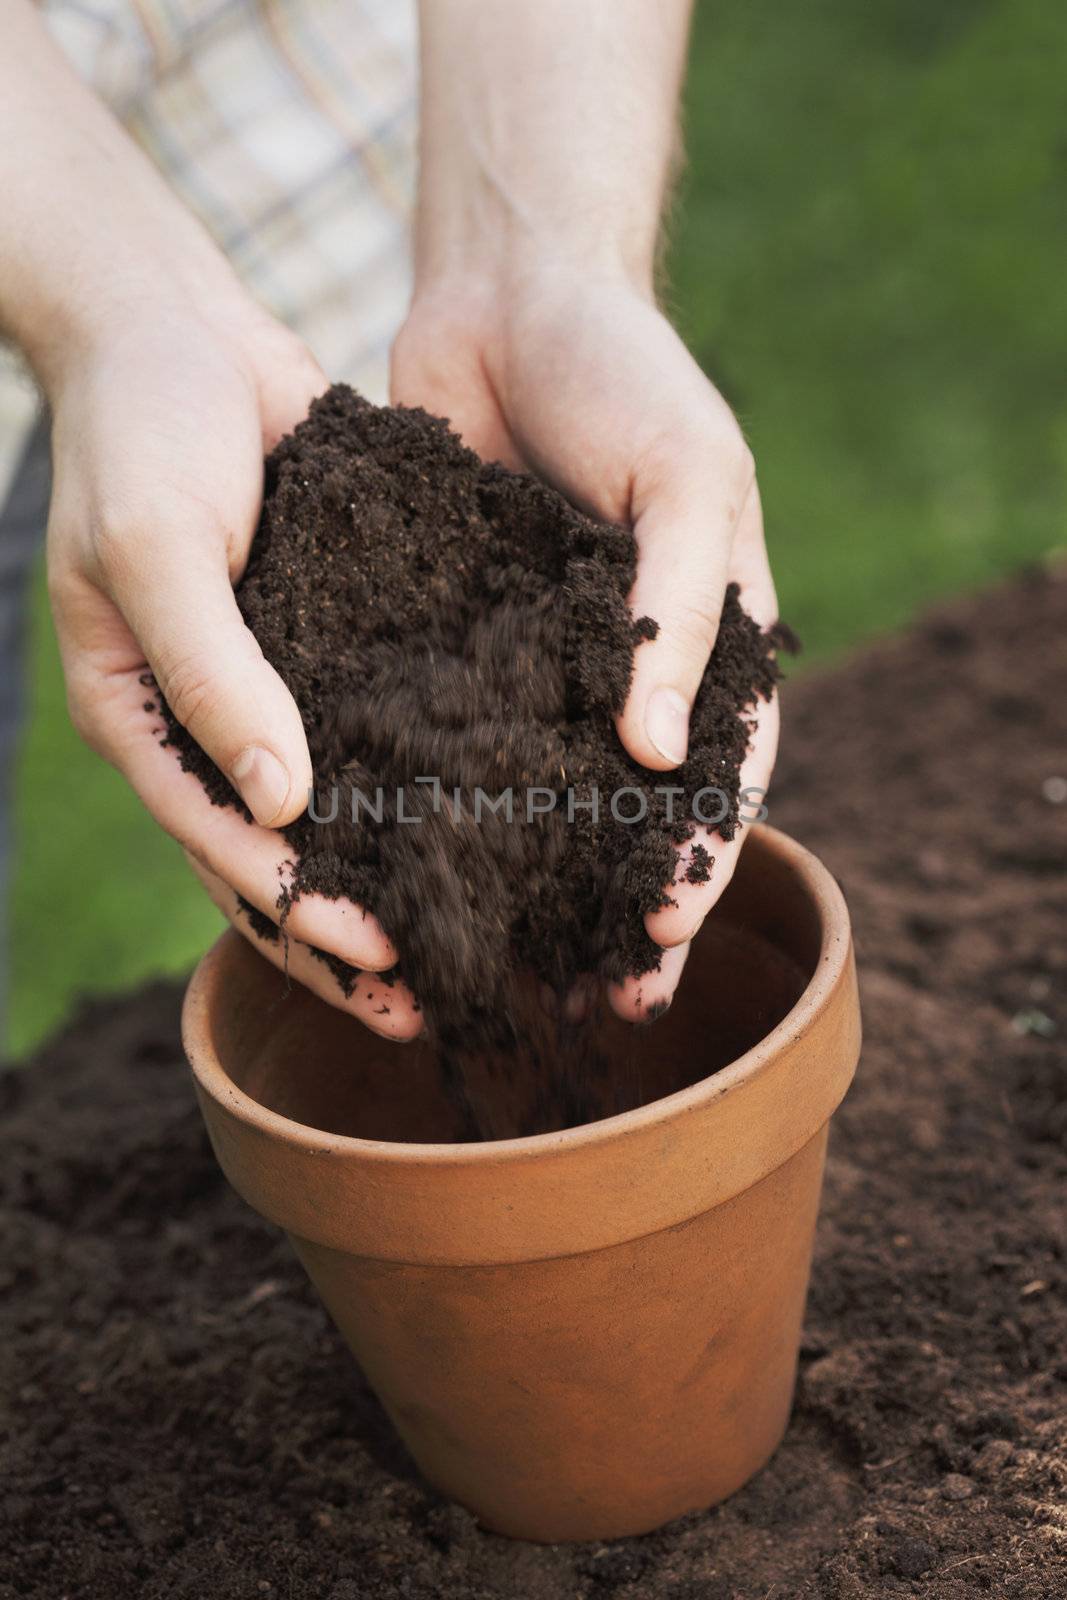 Hands putting soil into a clay flower pot